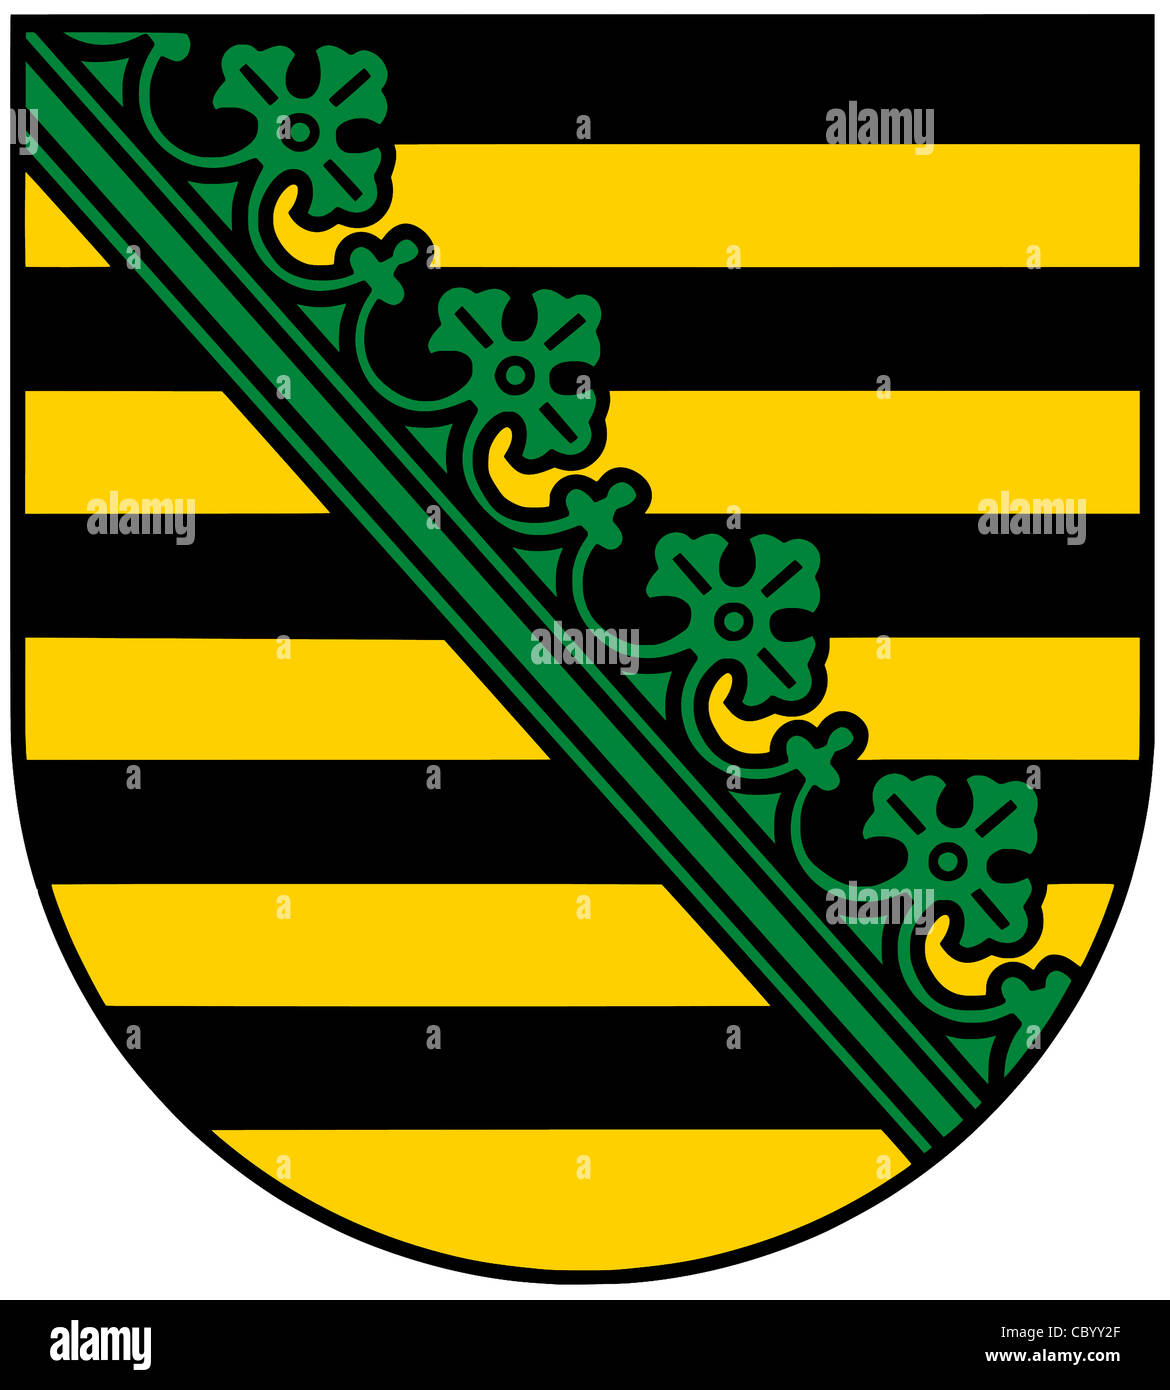 Coat of arms of the German federal state Saxony. Stock Photo